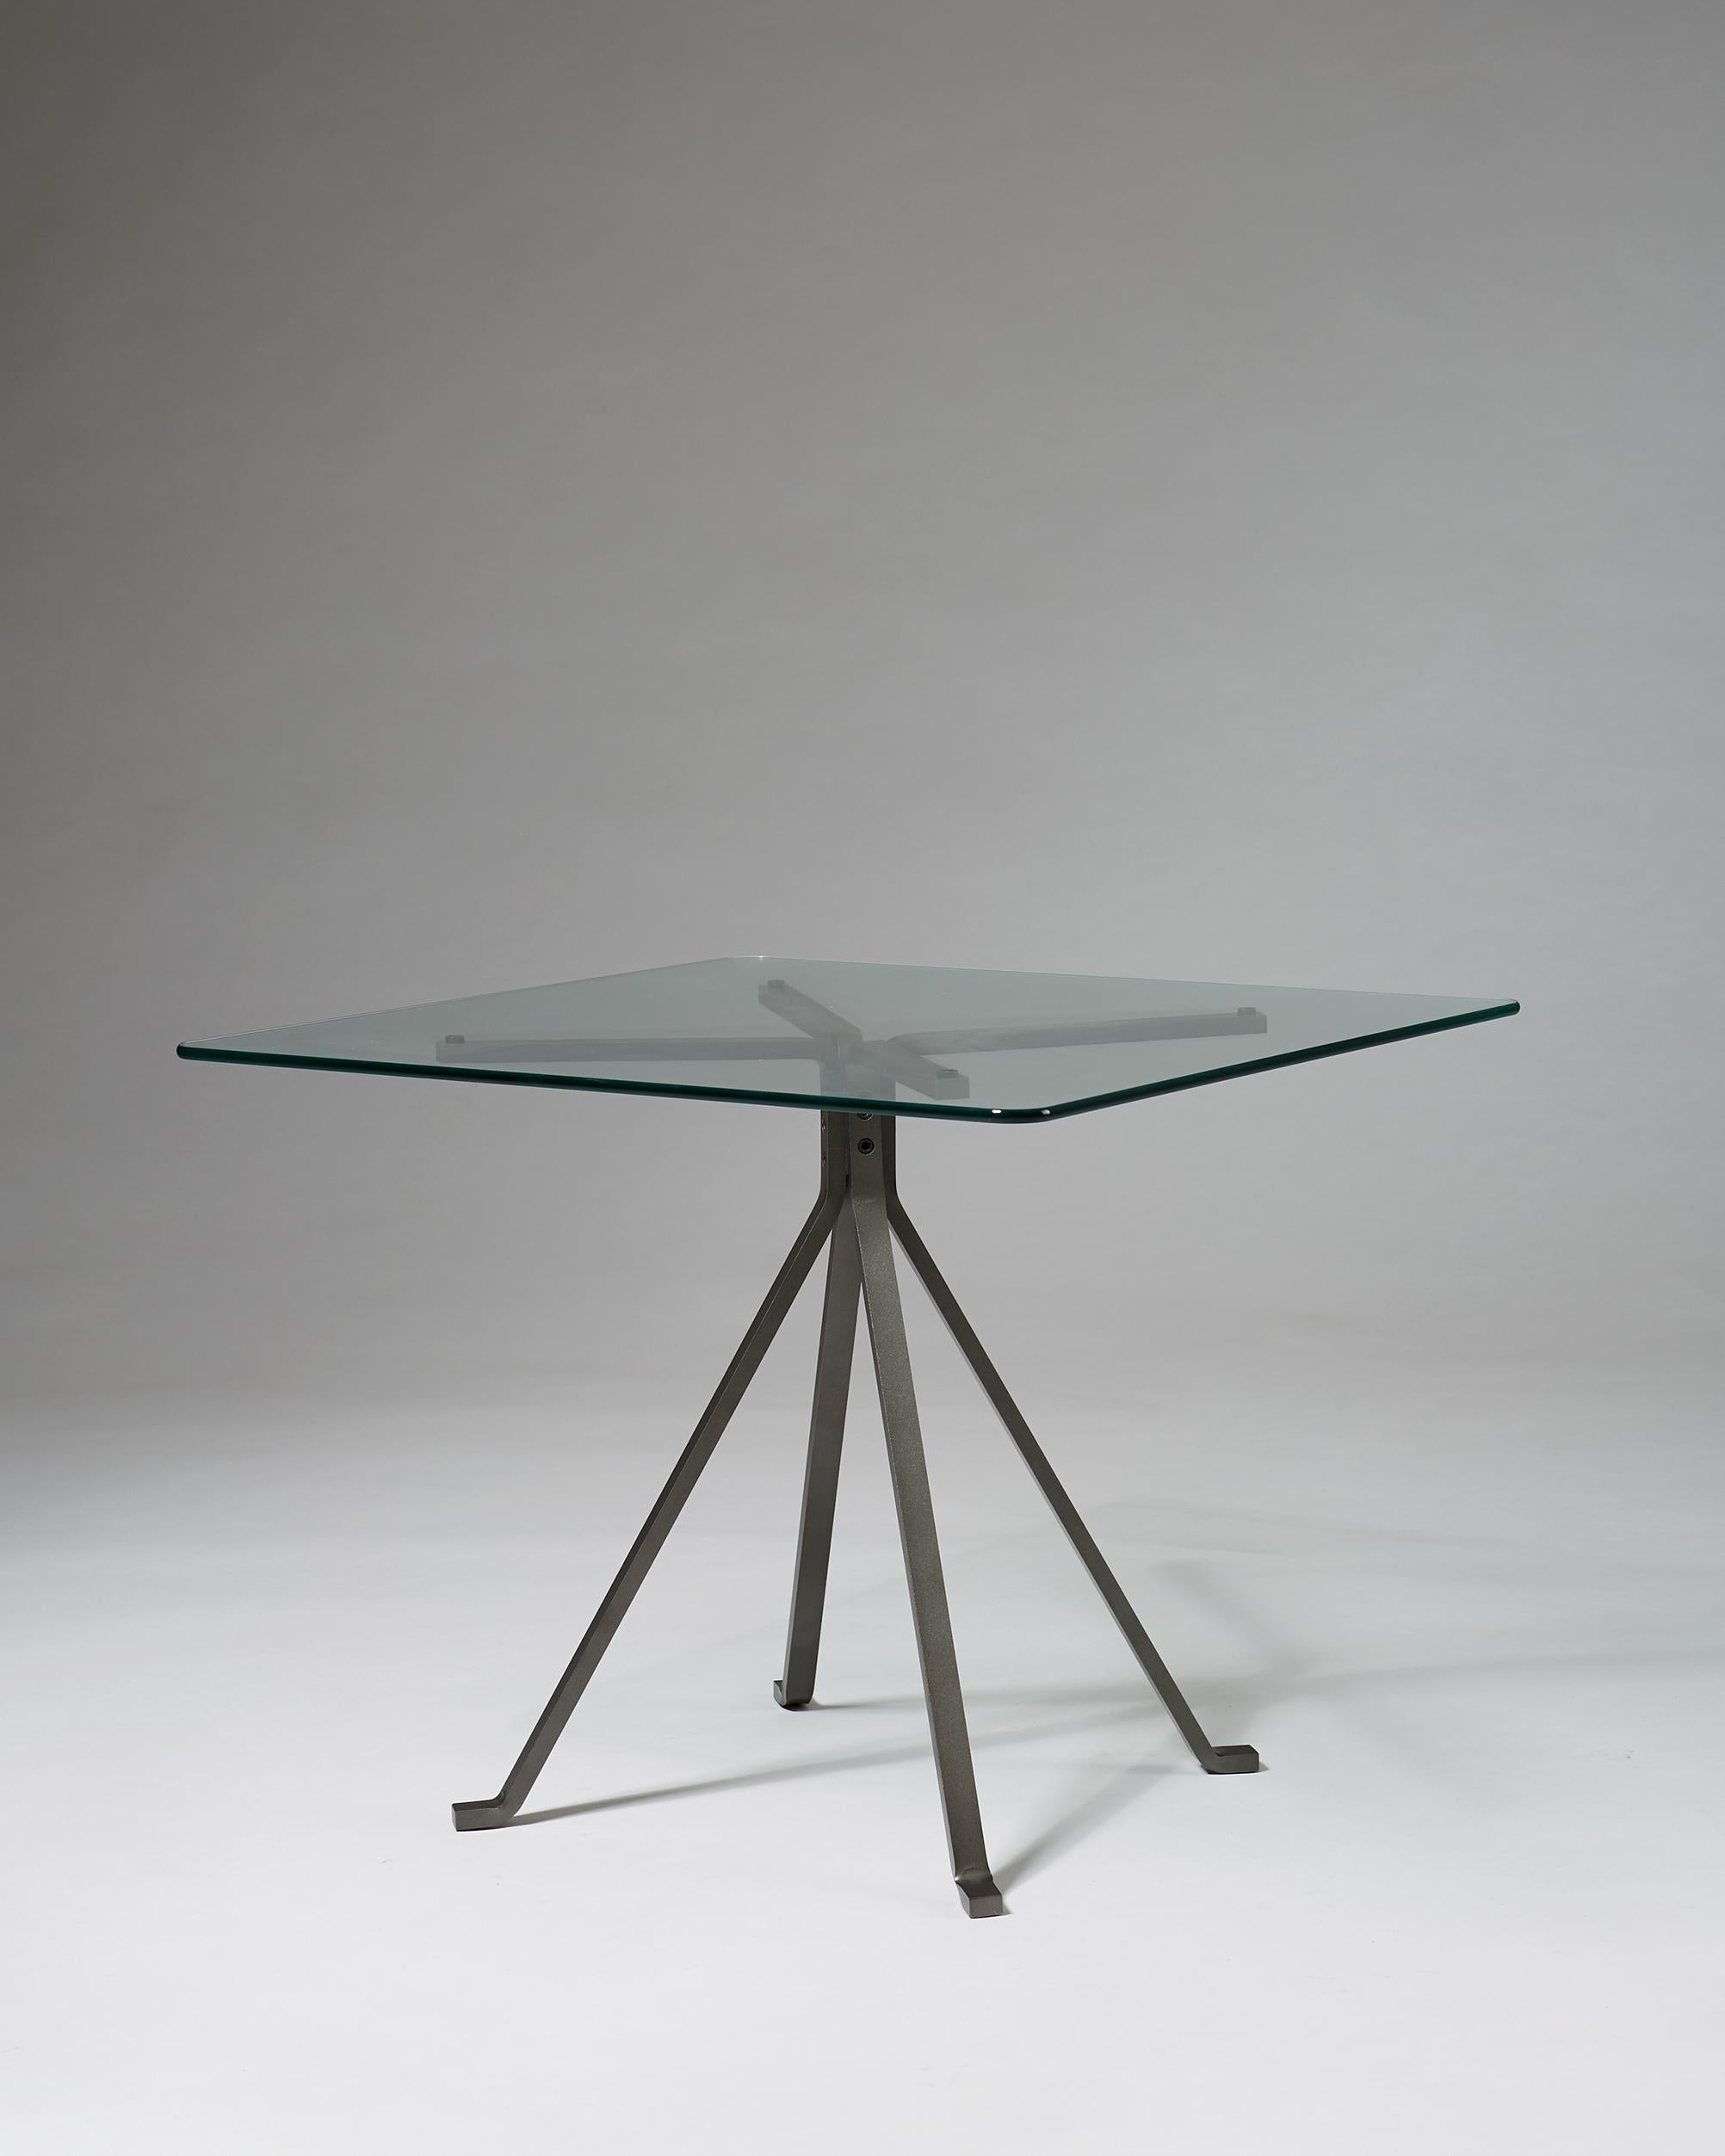 Occasional Table “Cuginetto”, Designed by Enzo Mari for Driade, Italy ...